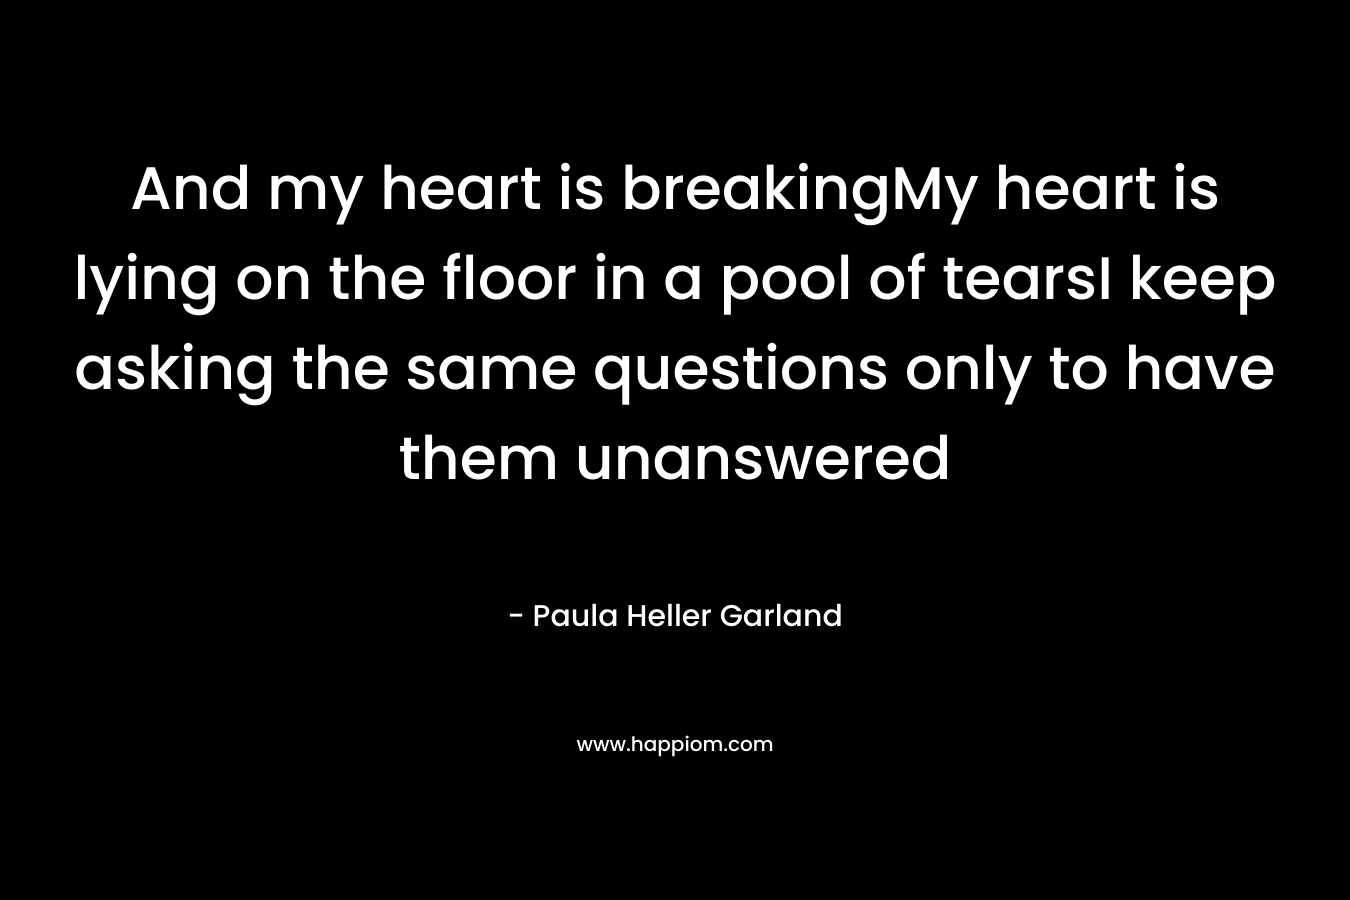 And my heart is breakingMy heart is lying on the floor in a pool of tearsI keep asking the same questions only to have them unanswered – Paula Heller Garland